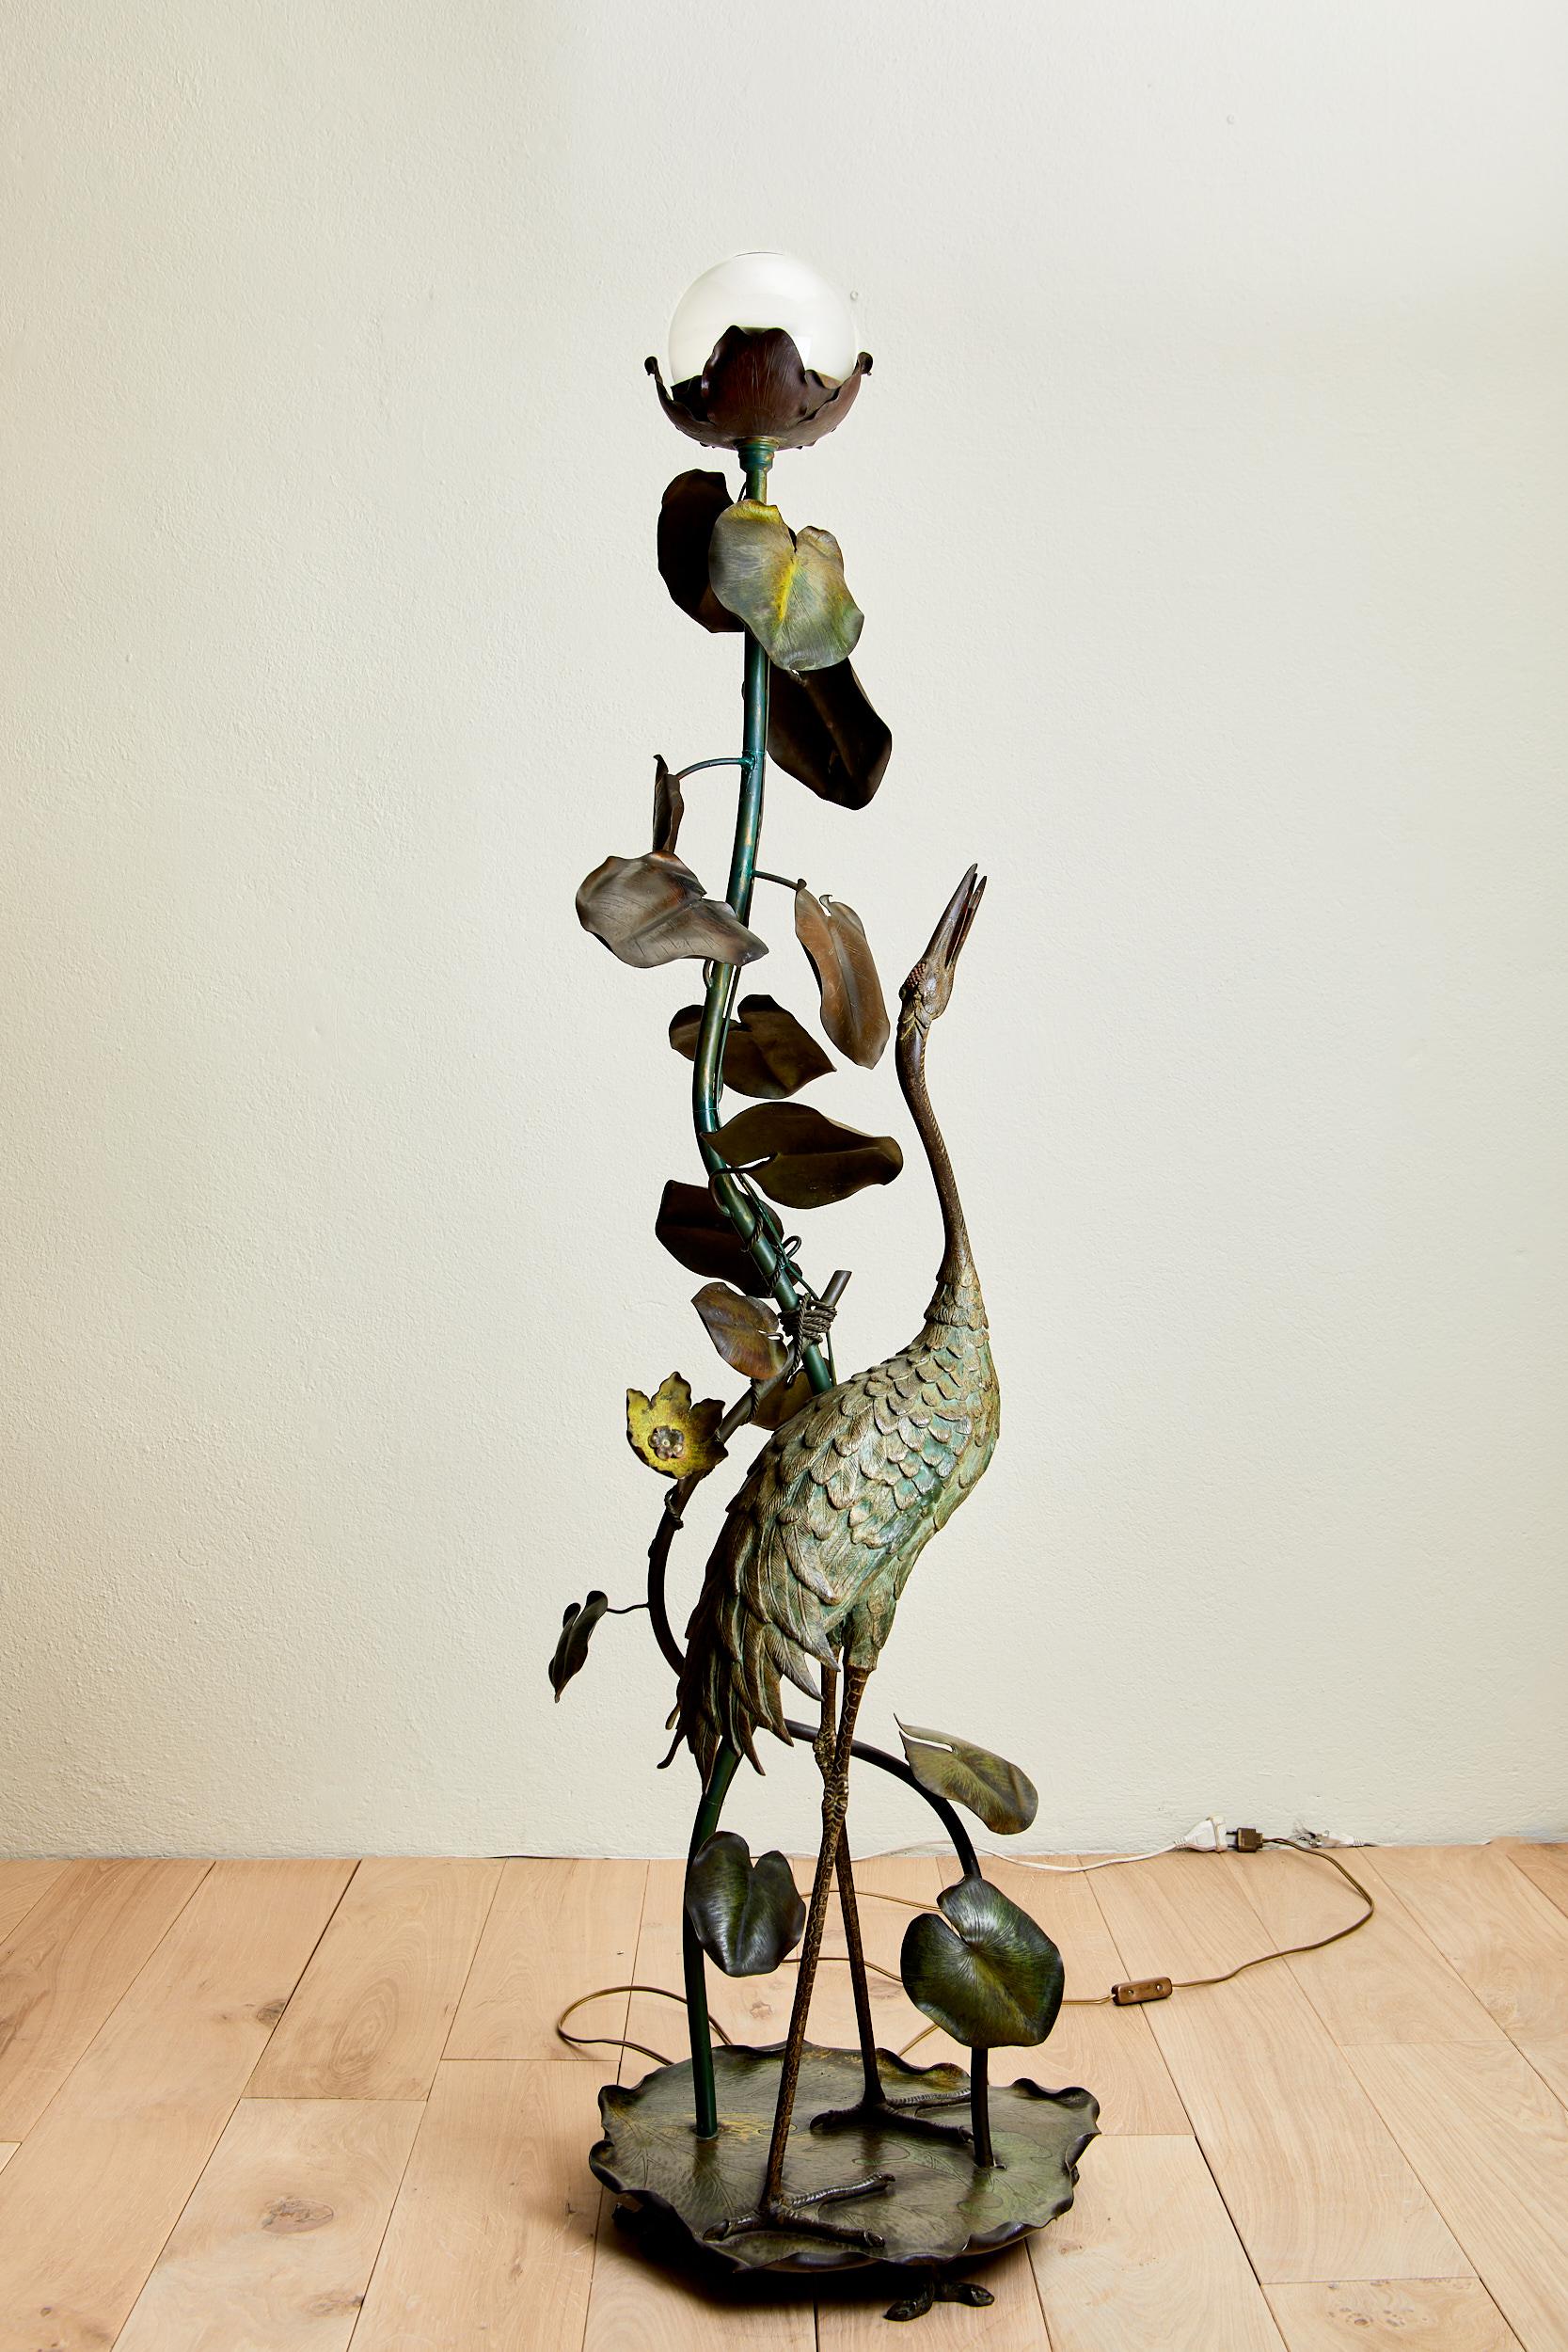 Heron Floor Lamp in Bronze, 
Art Nouveau, 
Japanese Style,
patinated bronze and painted iron,
circa 1900, France.
Height 169 cm, diameter 43cm.